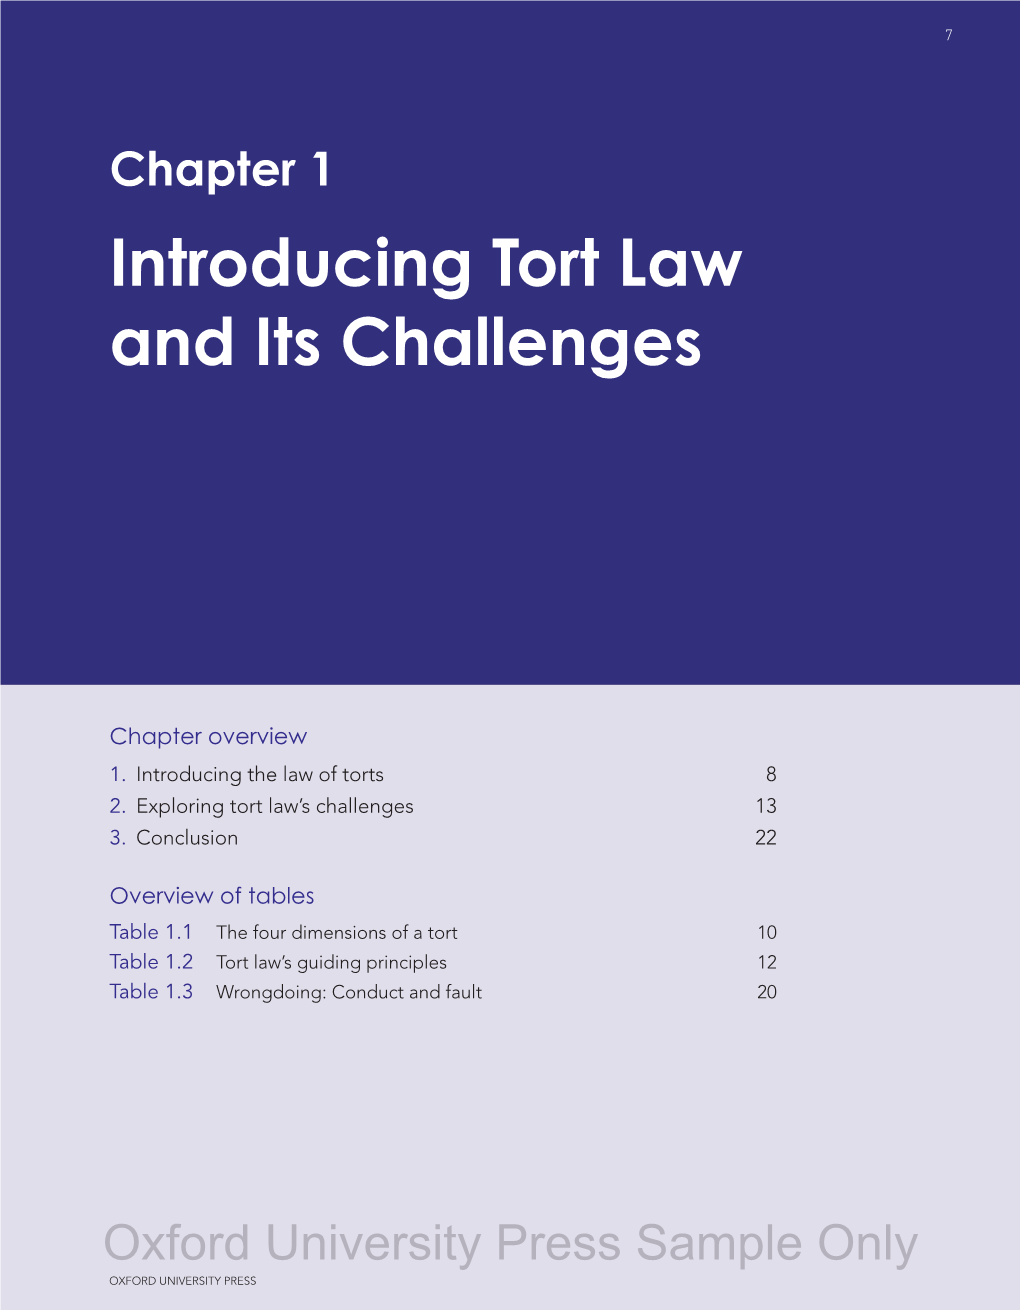 Introducing Tort Law and Its Challenges